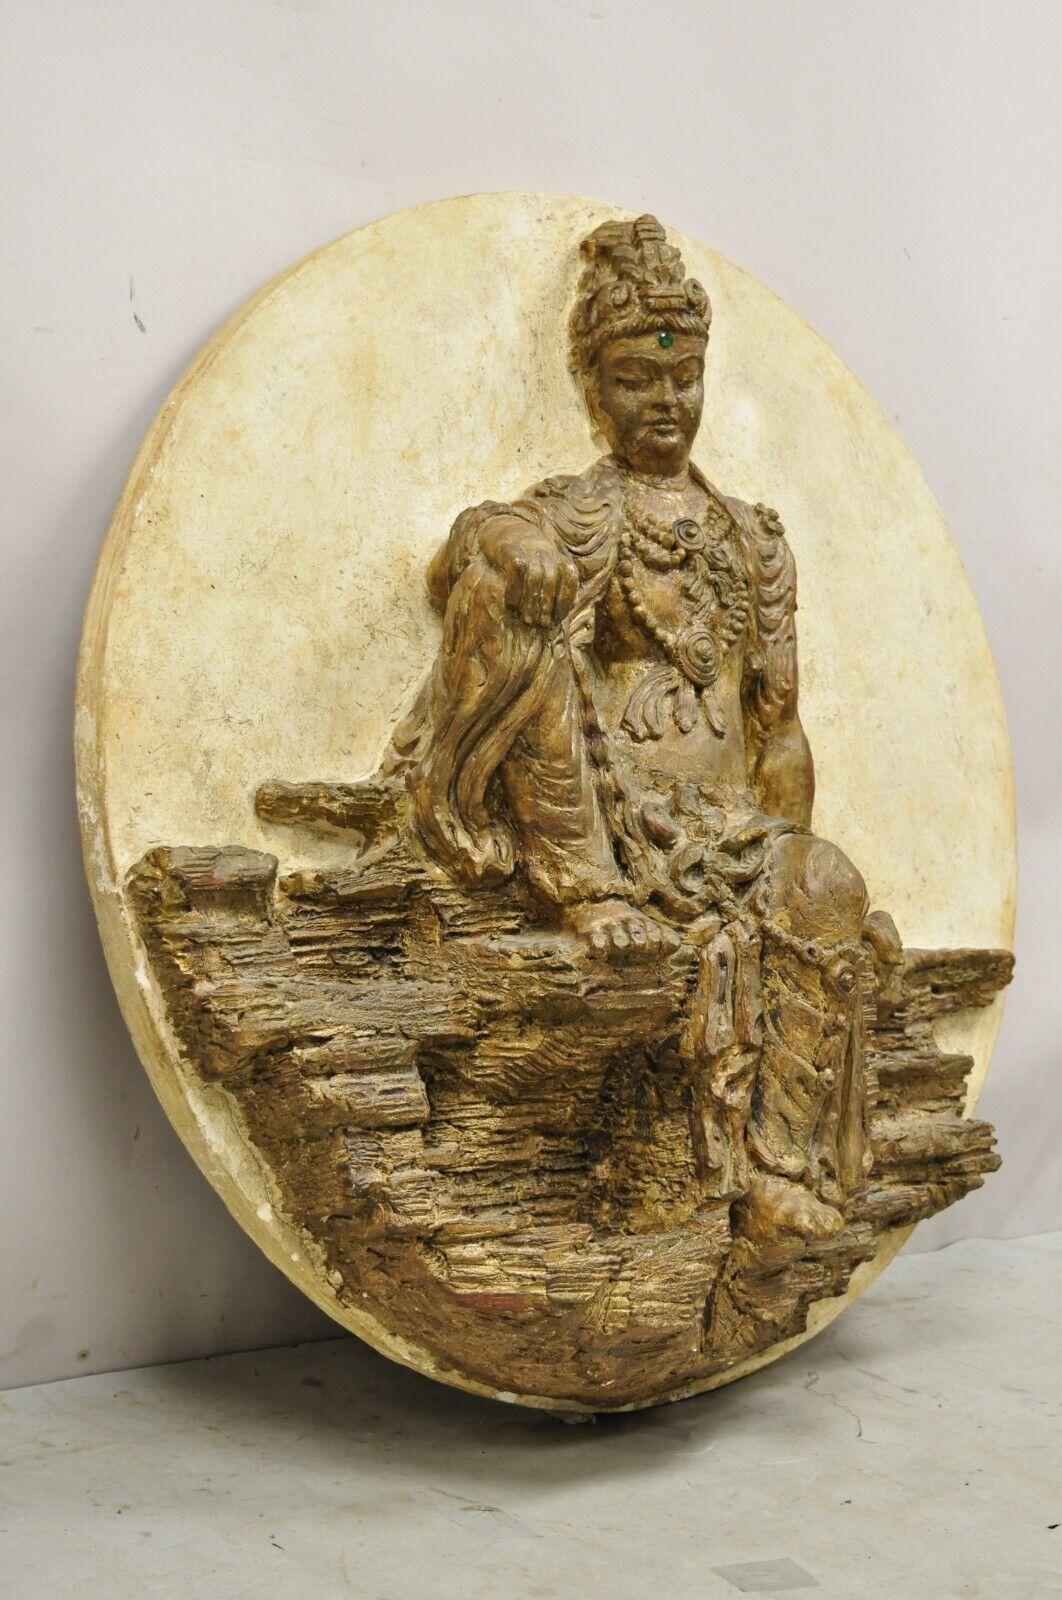 Large Vintage Fiberglass Kuan Shih Yin Buddha Relief Round Wall Art Sculpture. item featured is a large impressive form, remarkable details, small cubby under foot, nice distressed finish, approx 60 lbs.. Circa Late 20th Century. Measurements: 43